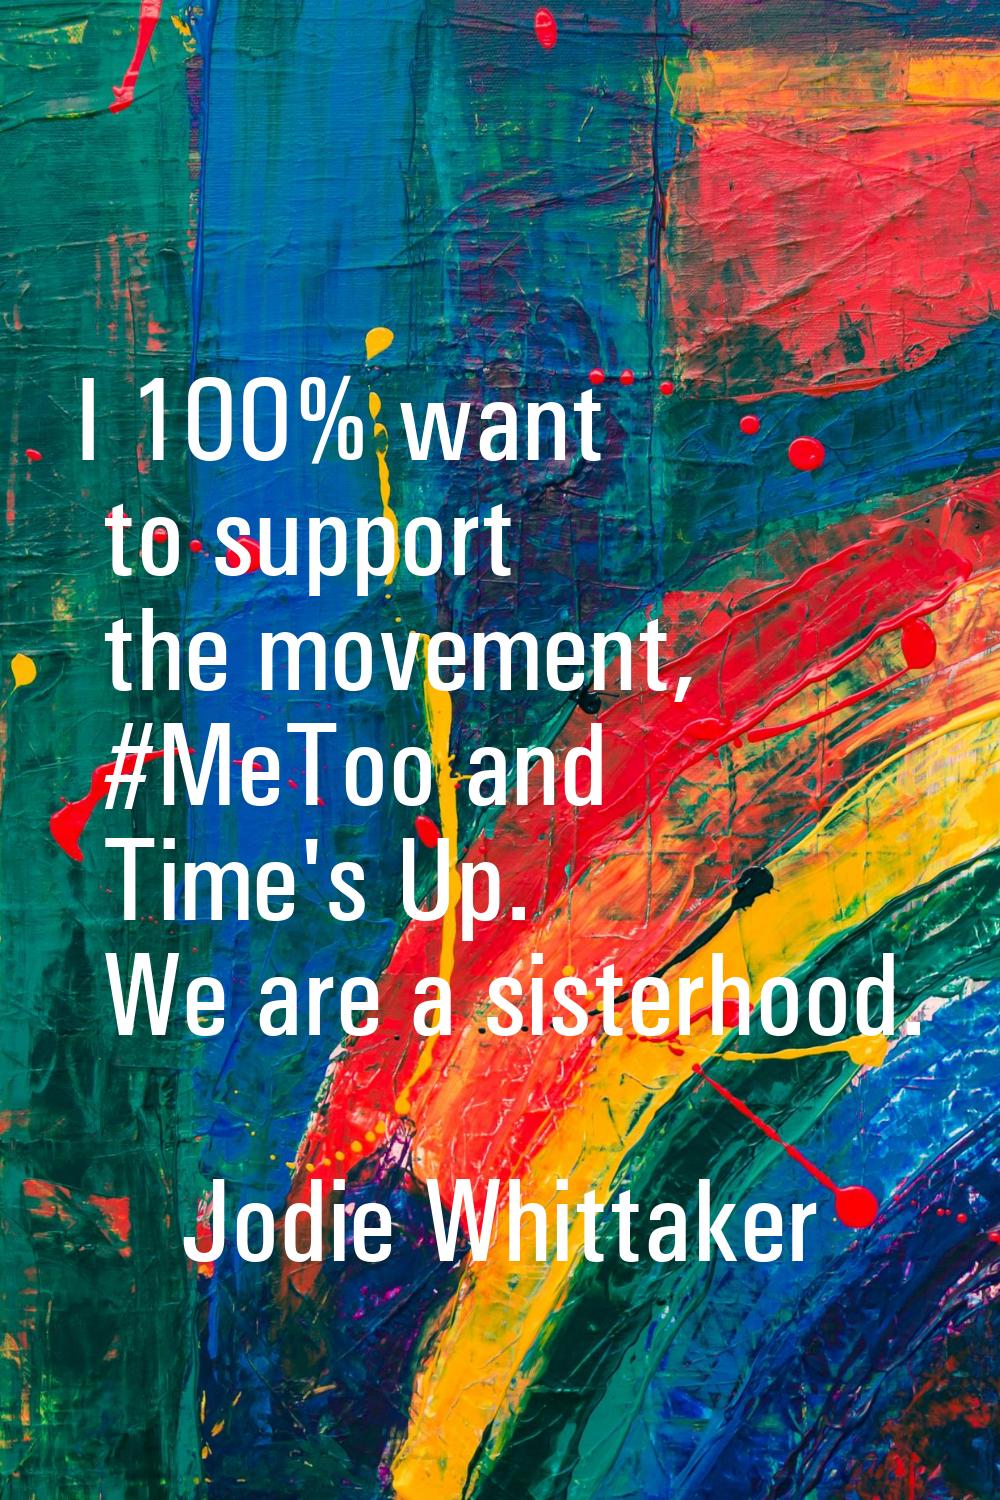 I 100% want to support the movement, #MeToo and Time's Up. We are a sisterhood.